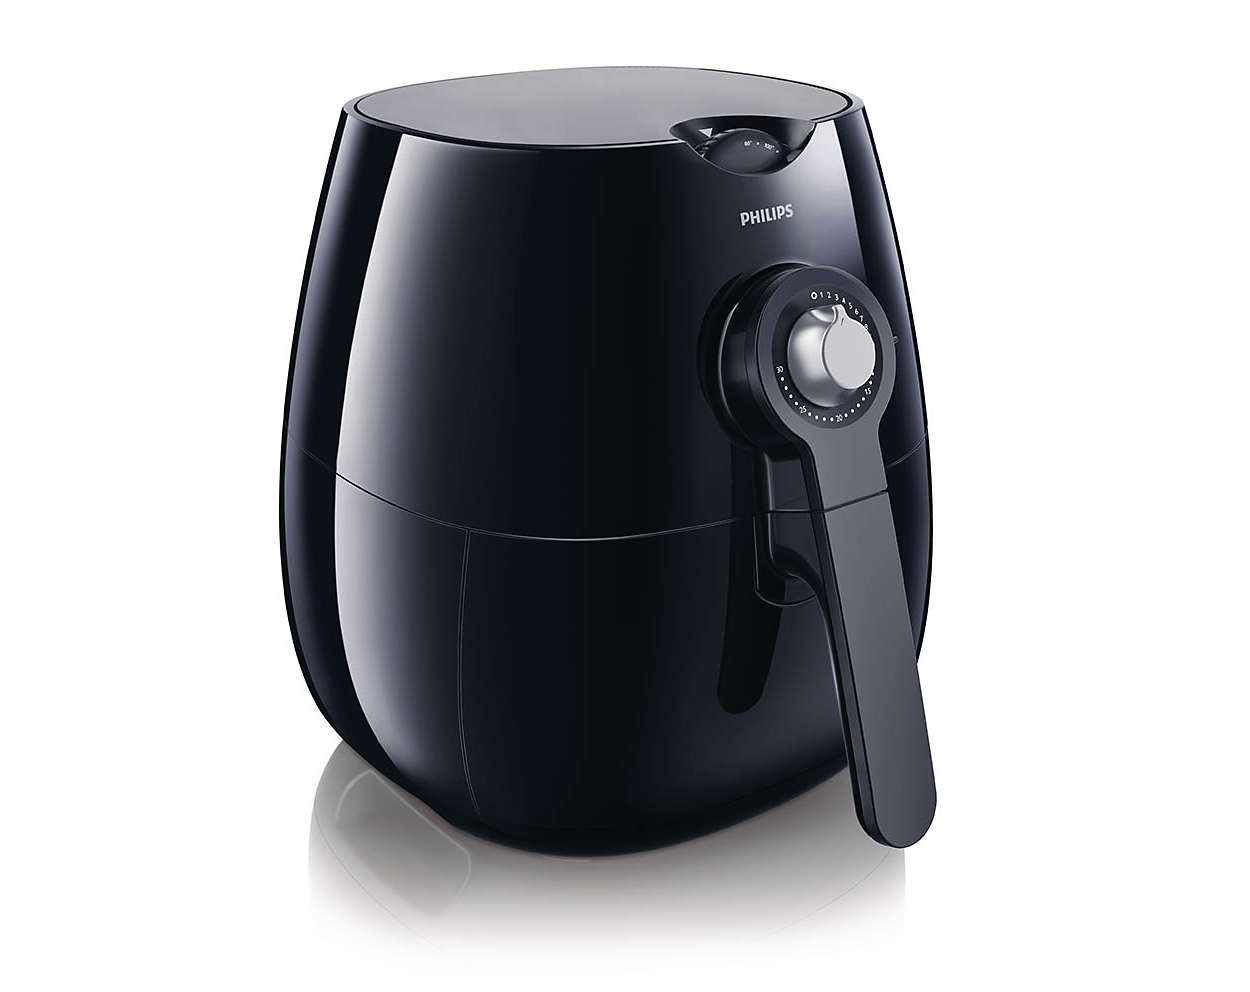 Top 5 Airfryer Brands In India